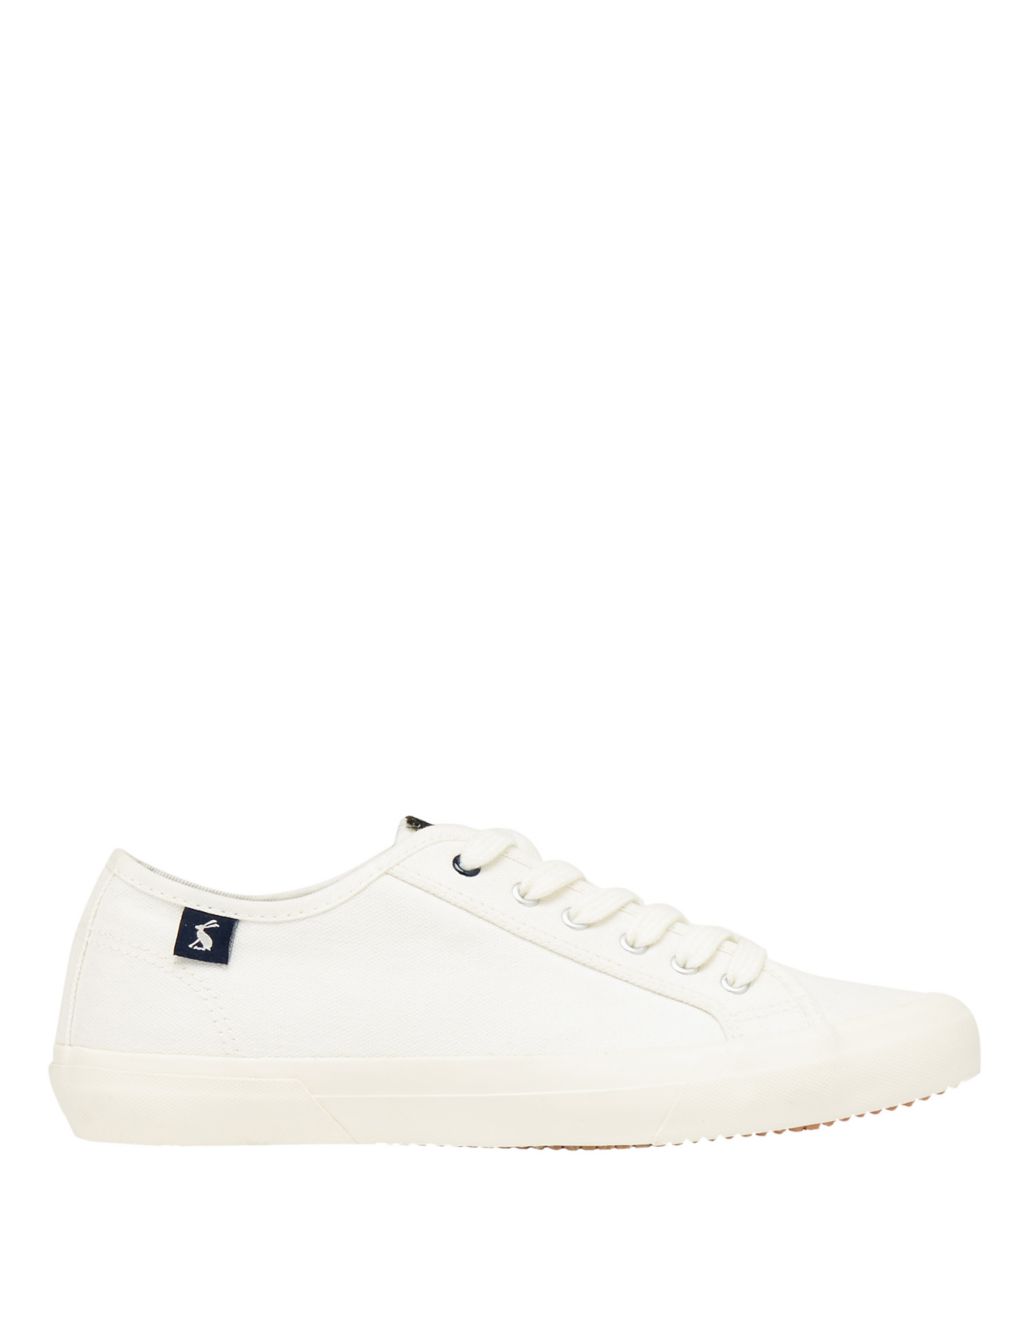 Canvas Lace Up Trainers image 1